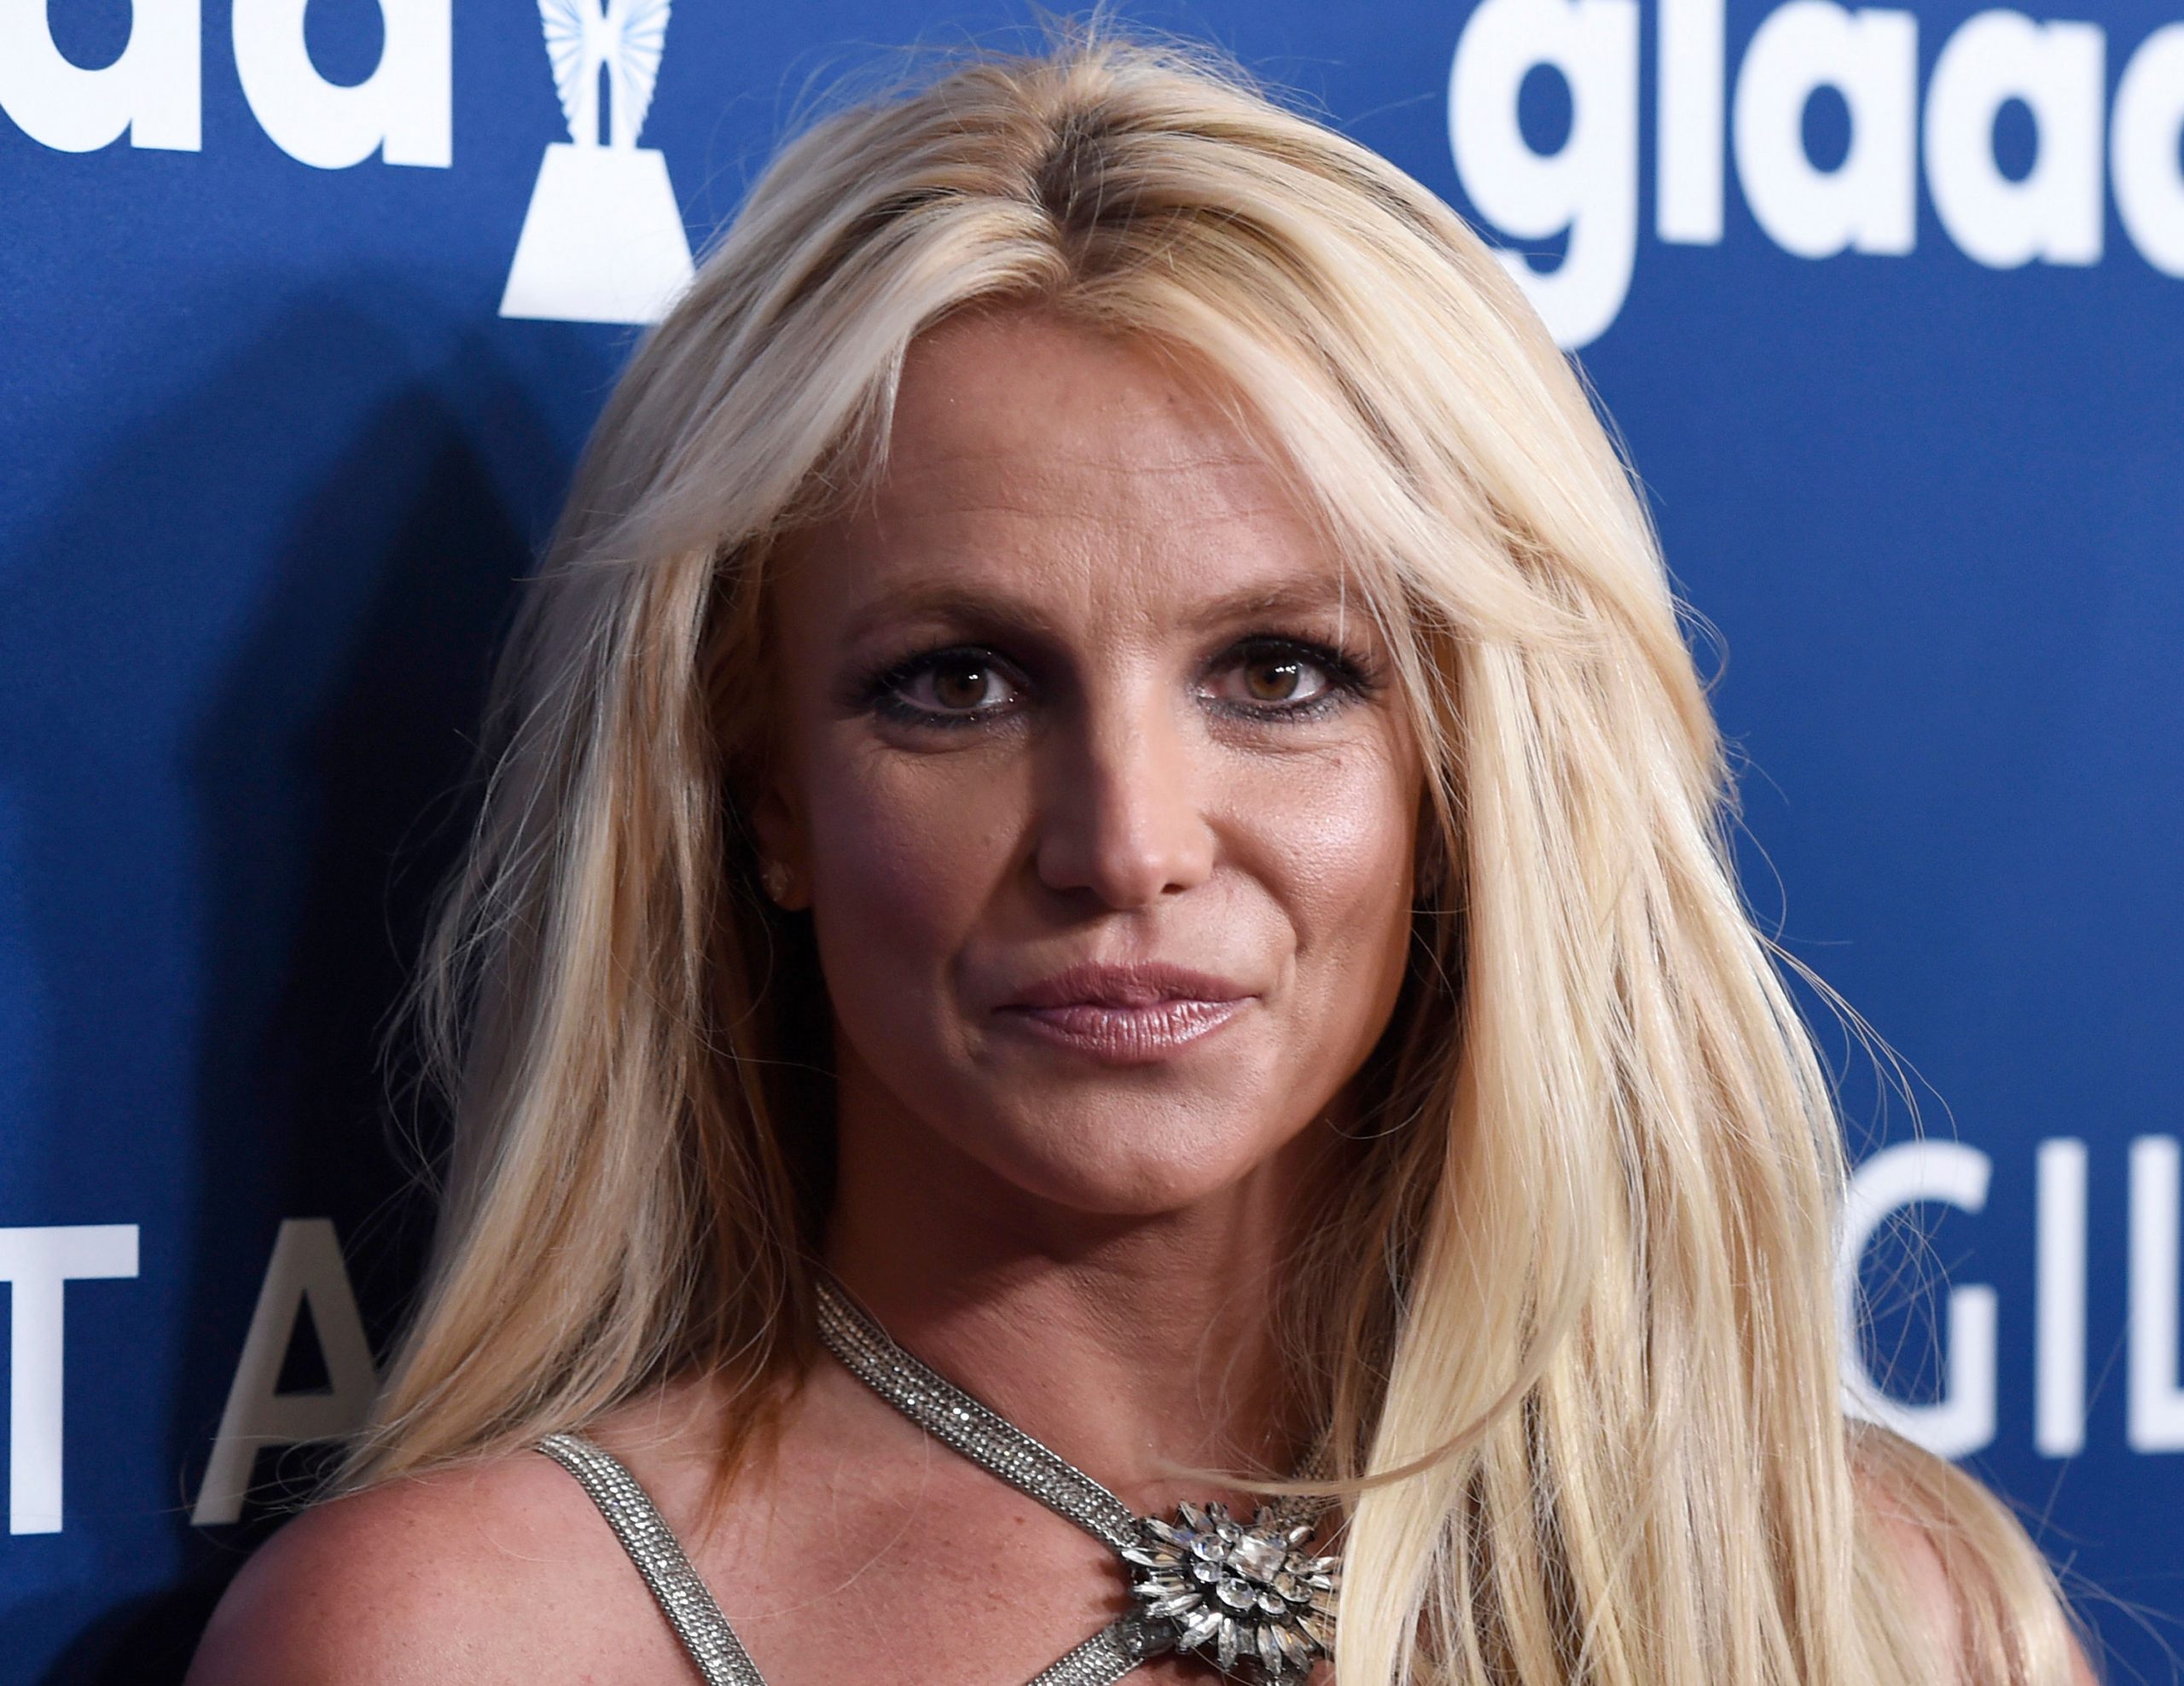 Britney Spears is pregnant with her third child; First baby with fianc Sam Asghari